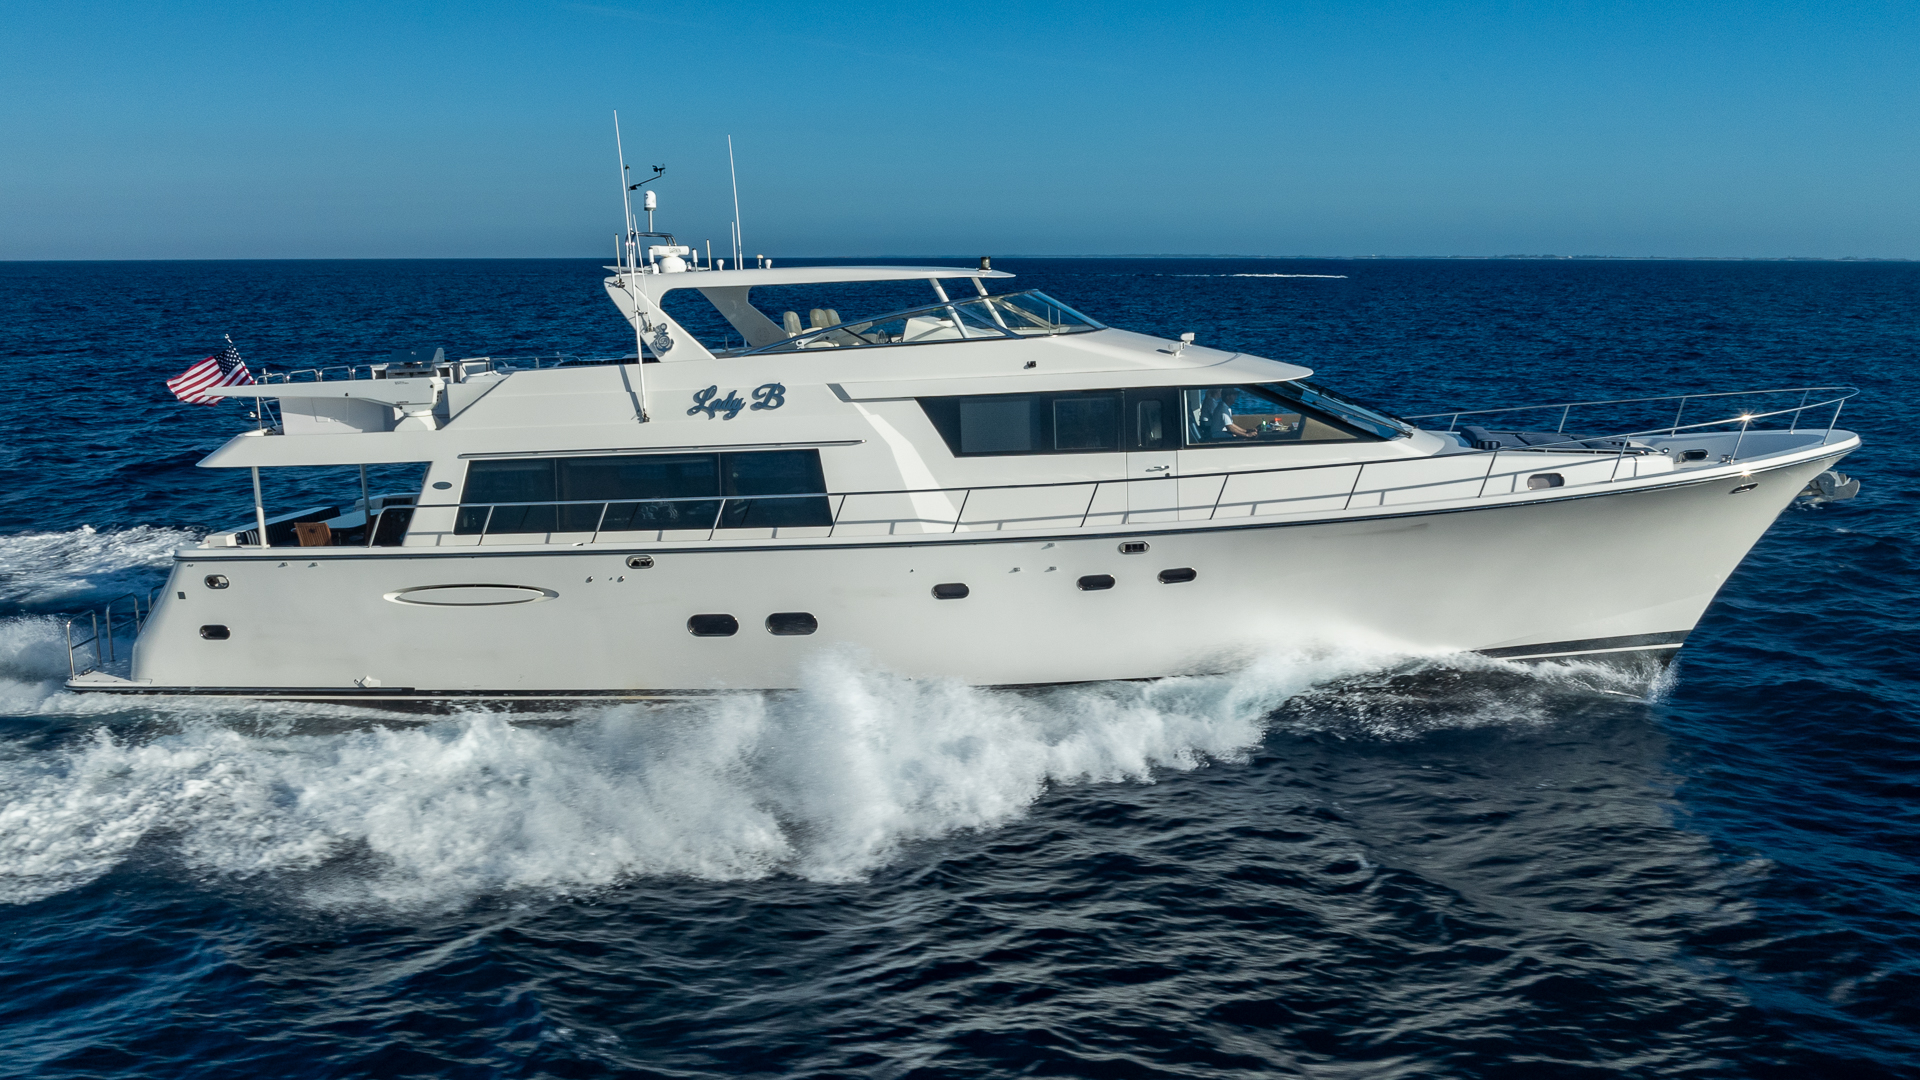 LADY B specs with detailed specification and builder summary